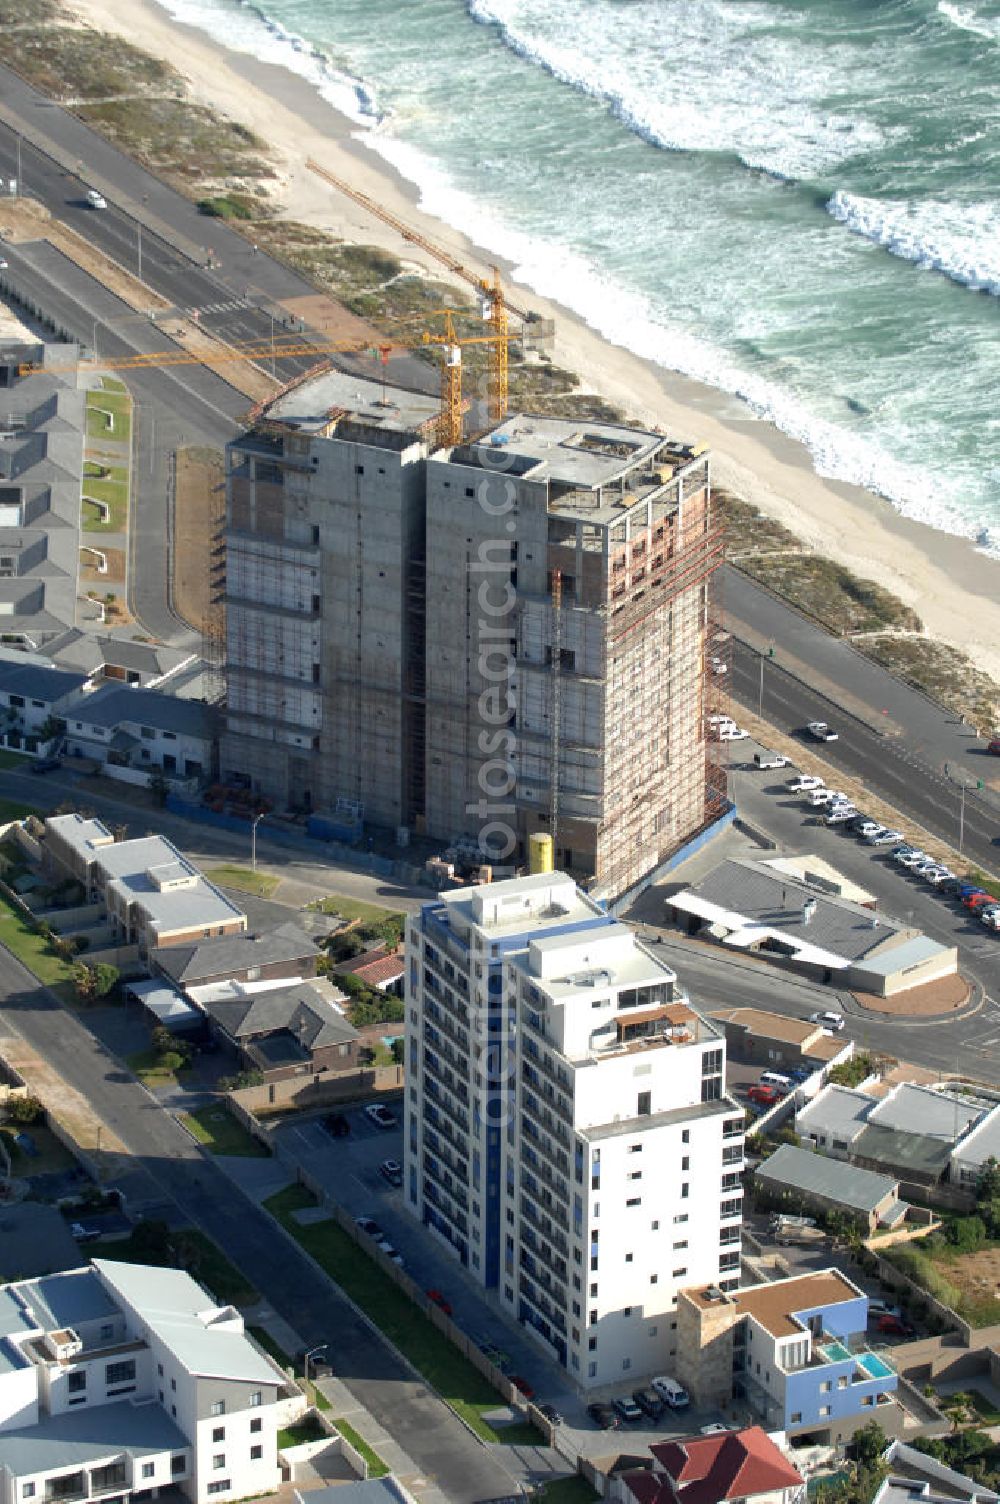 Aerial image Kapstadt - Construction site in the residental area on Blouberg Beach in Cape Town, South Africa